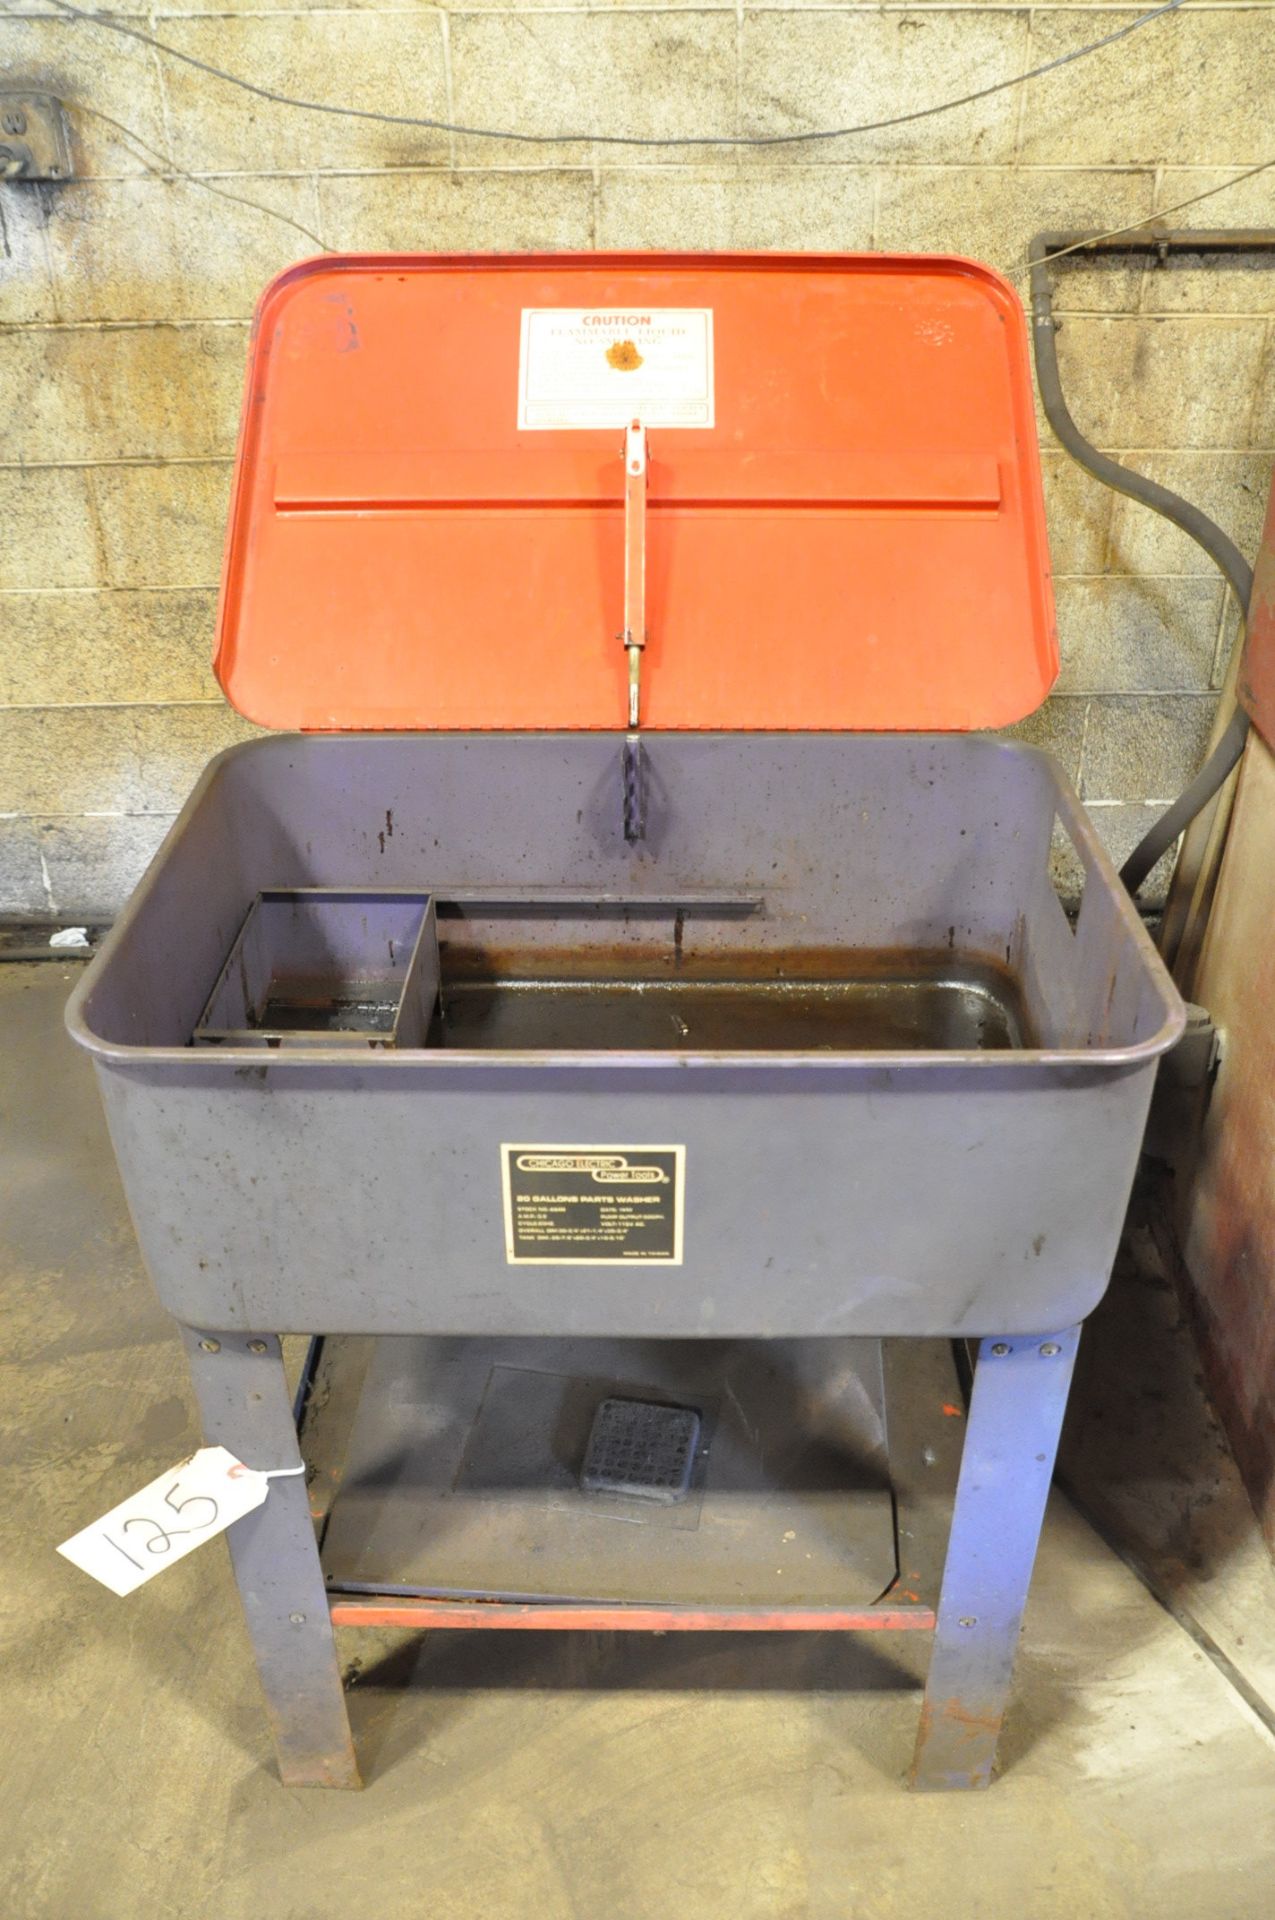 CHICAGO ELECTRIC Model 6500 20-Gallon Parts Washer (1992)